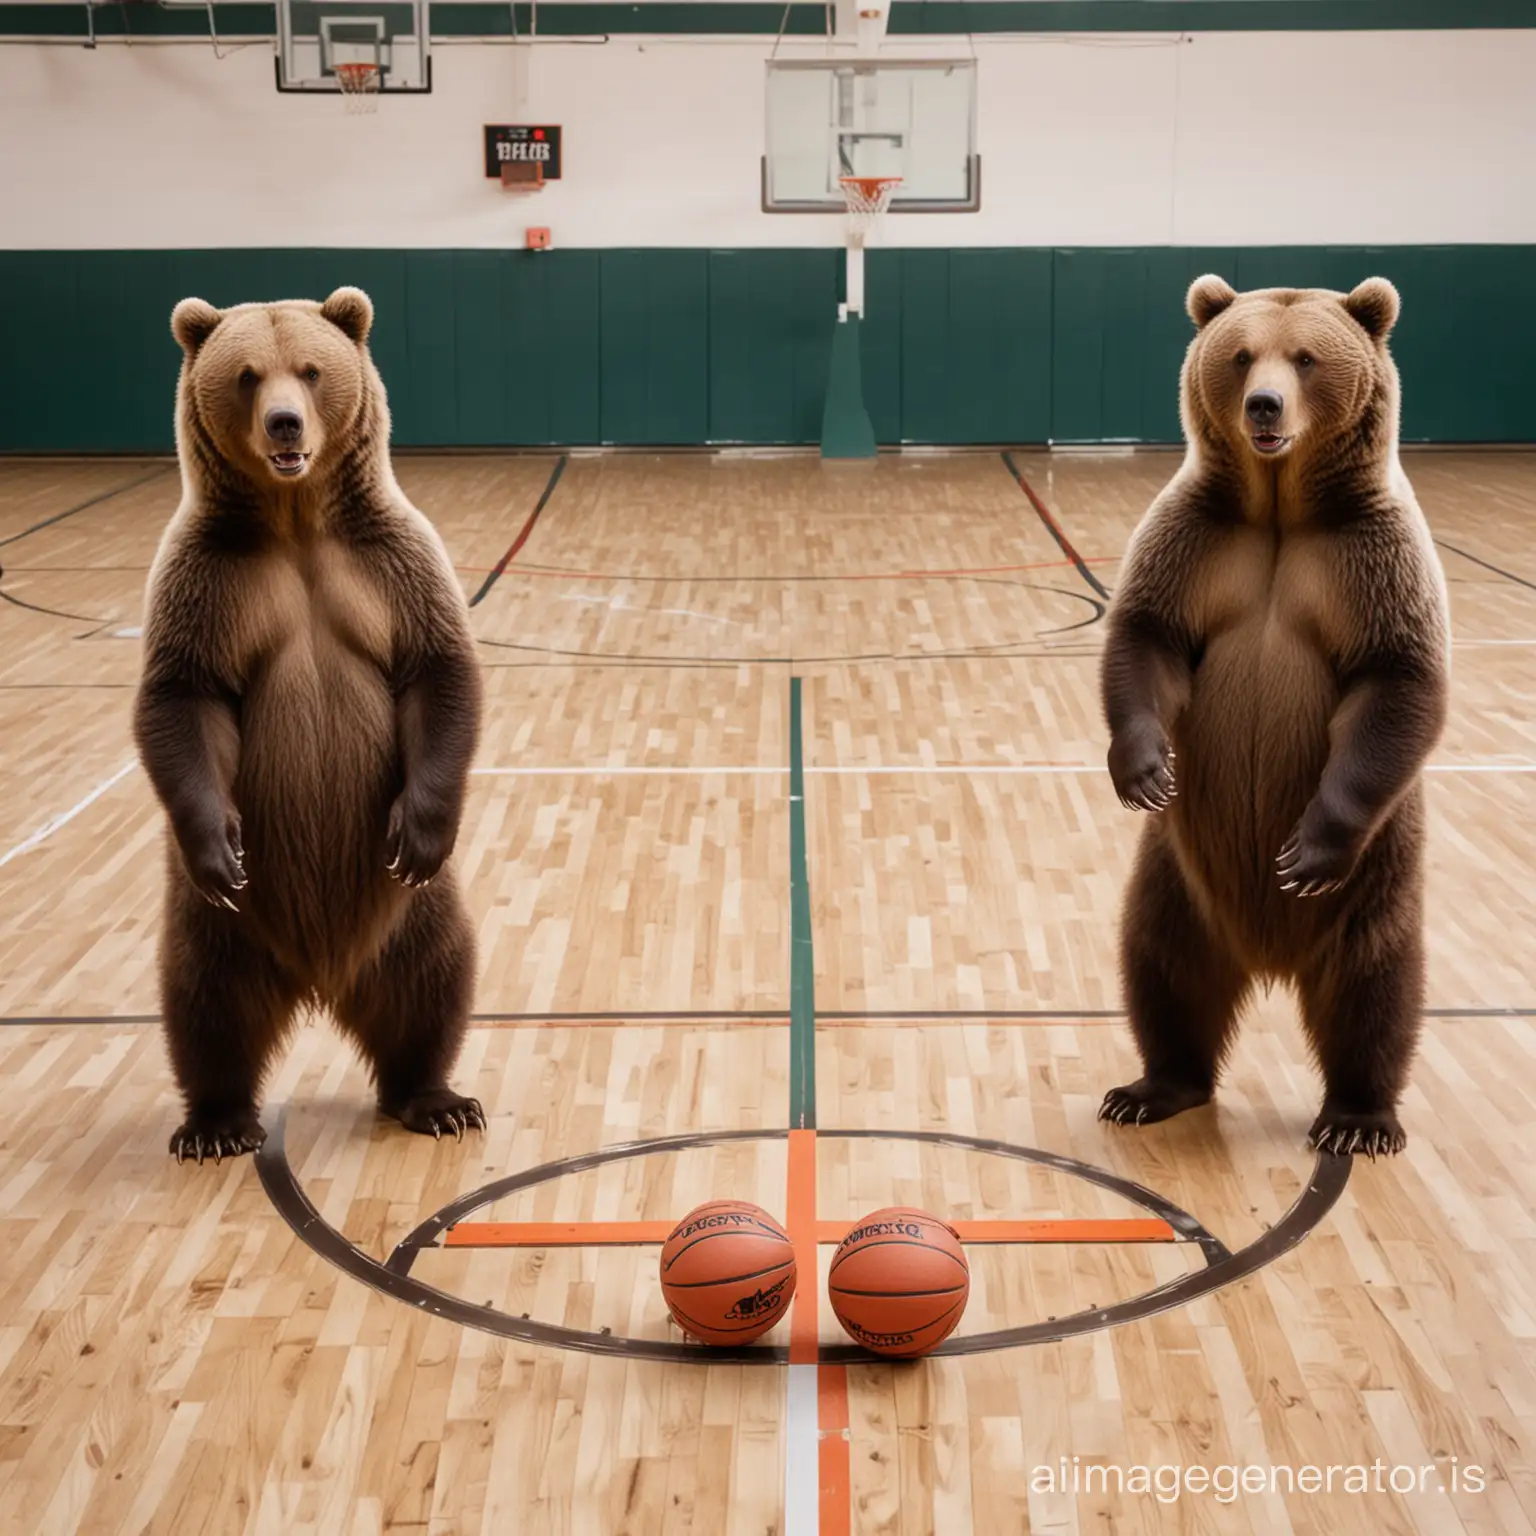 Grizzly bears standing in a basketball court with a basketball in their paws